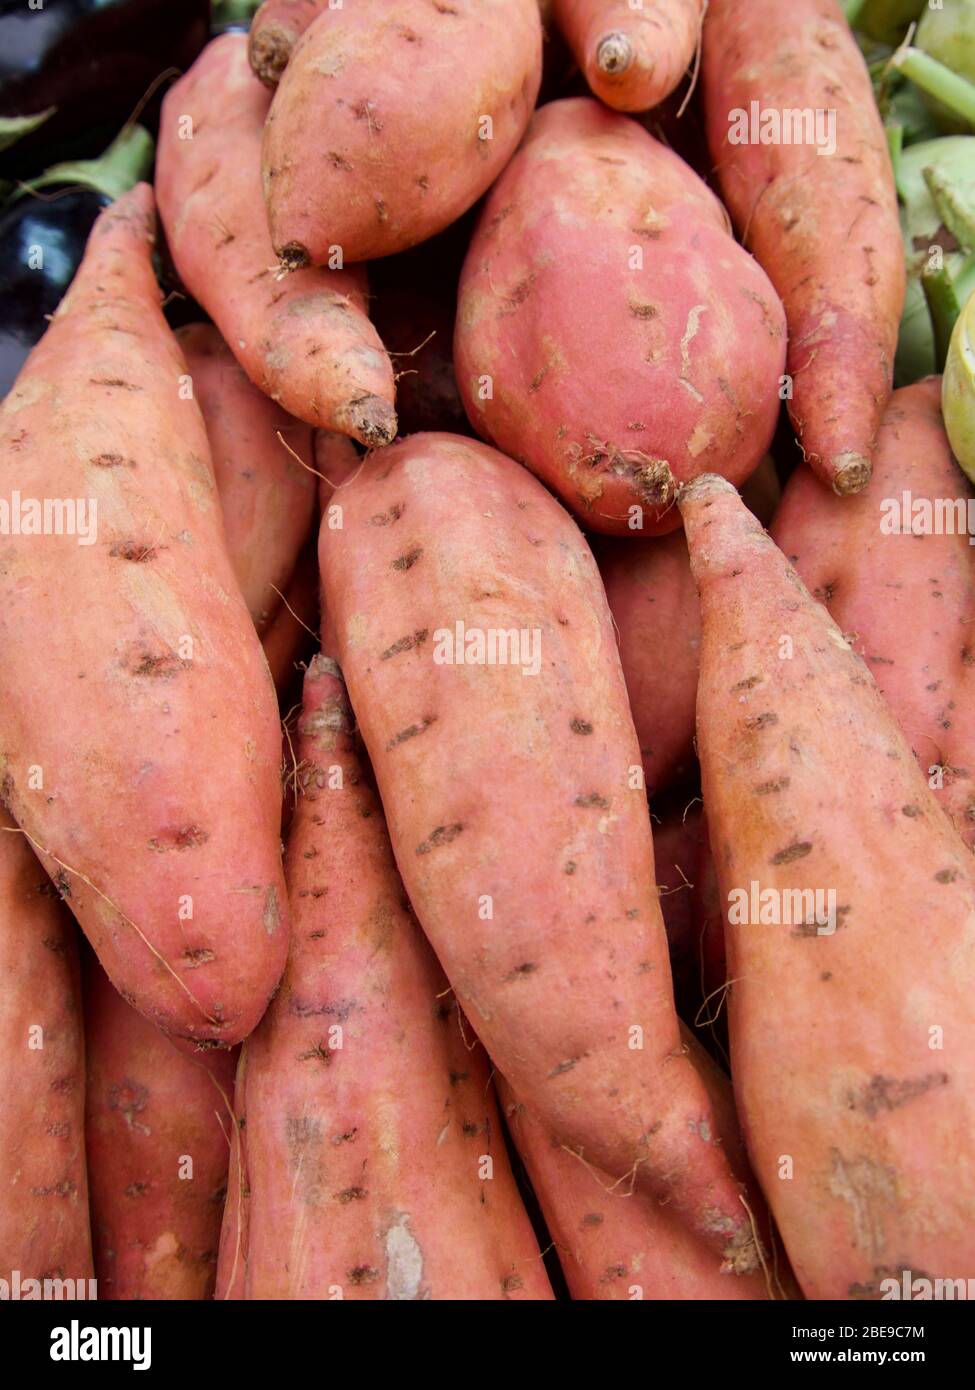 harvested potato tubers different varieties Stock Photo